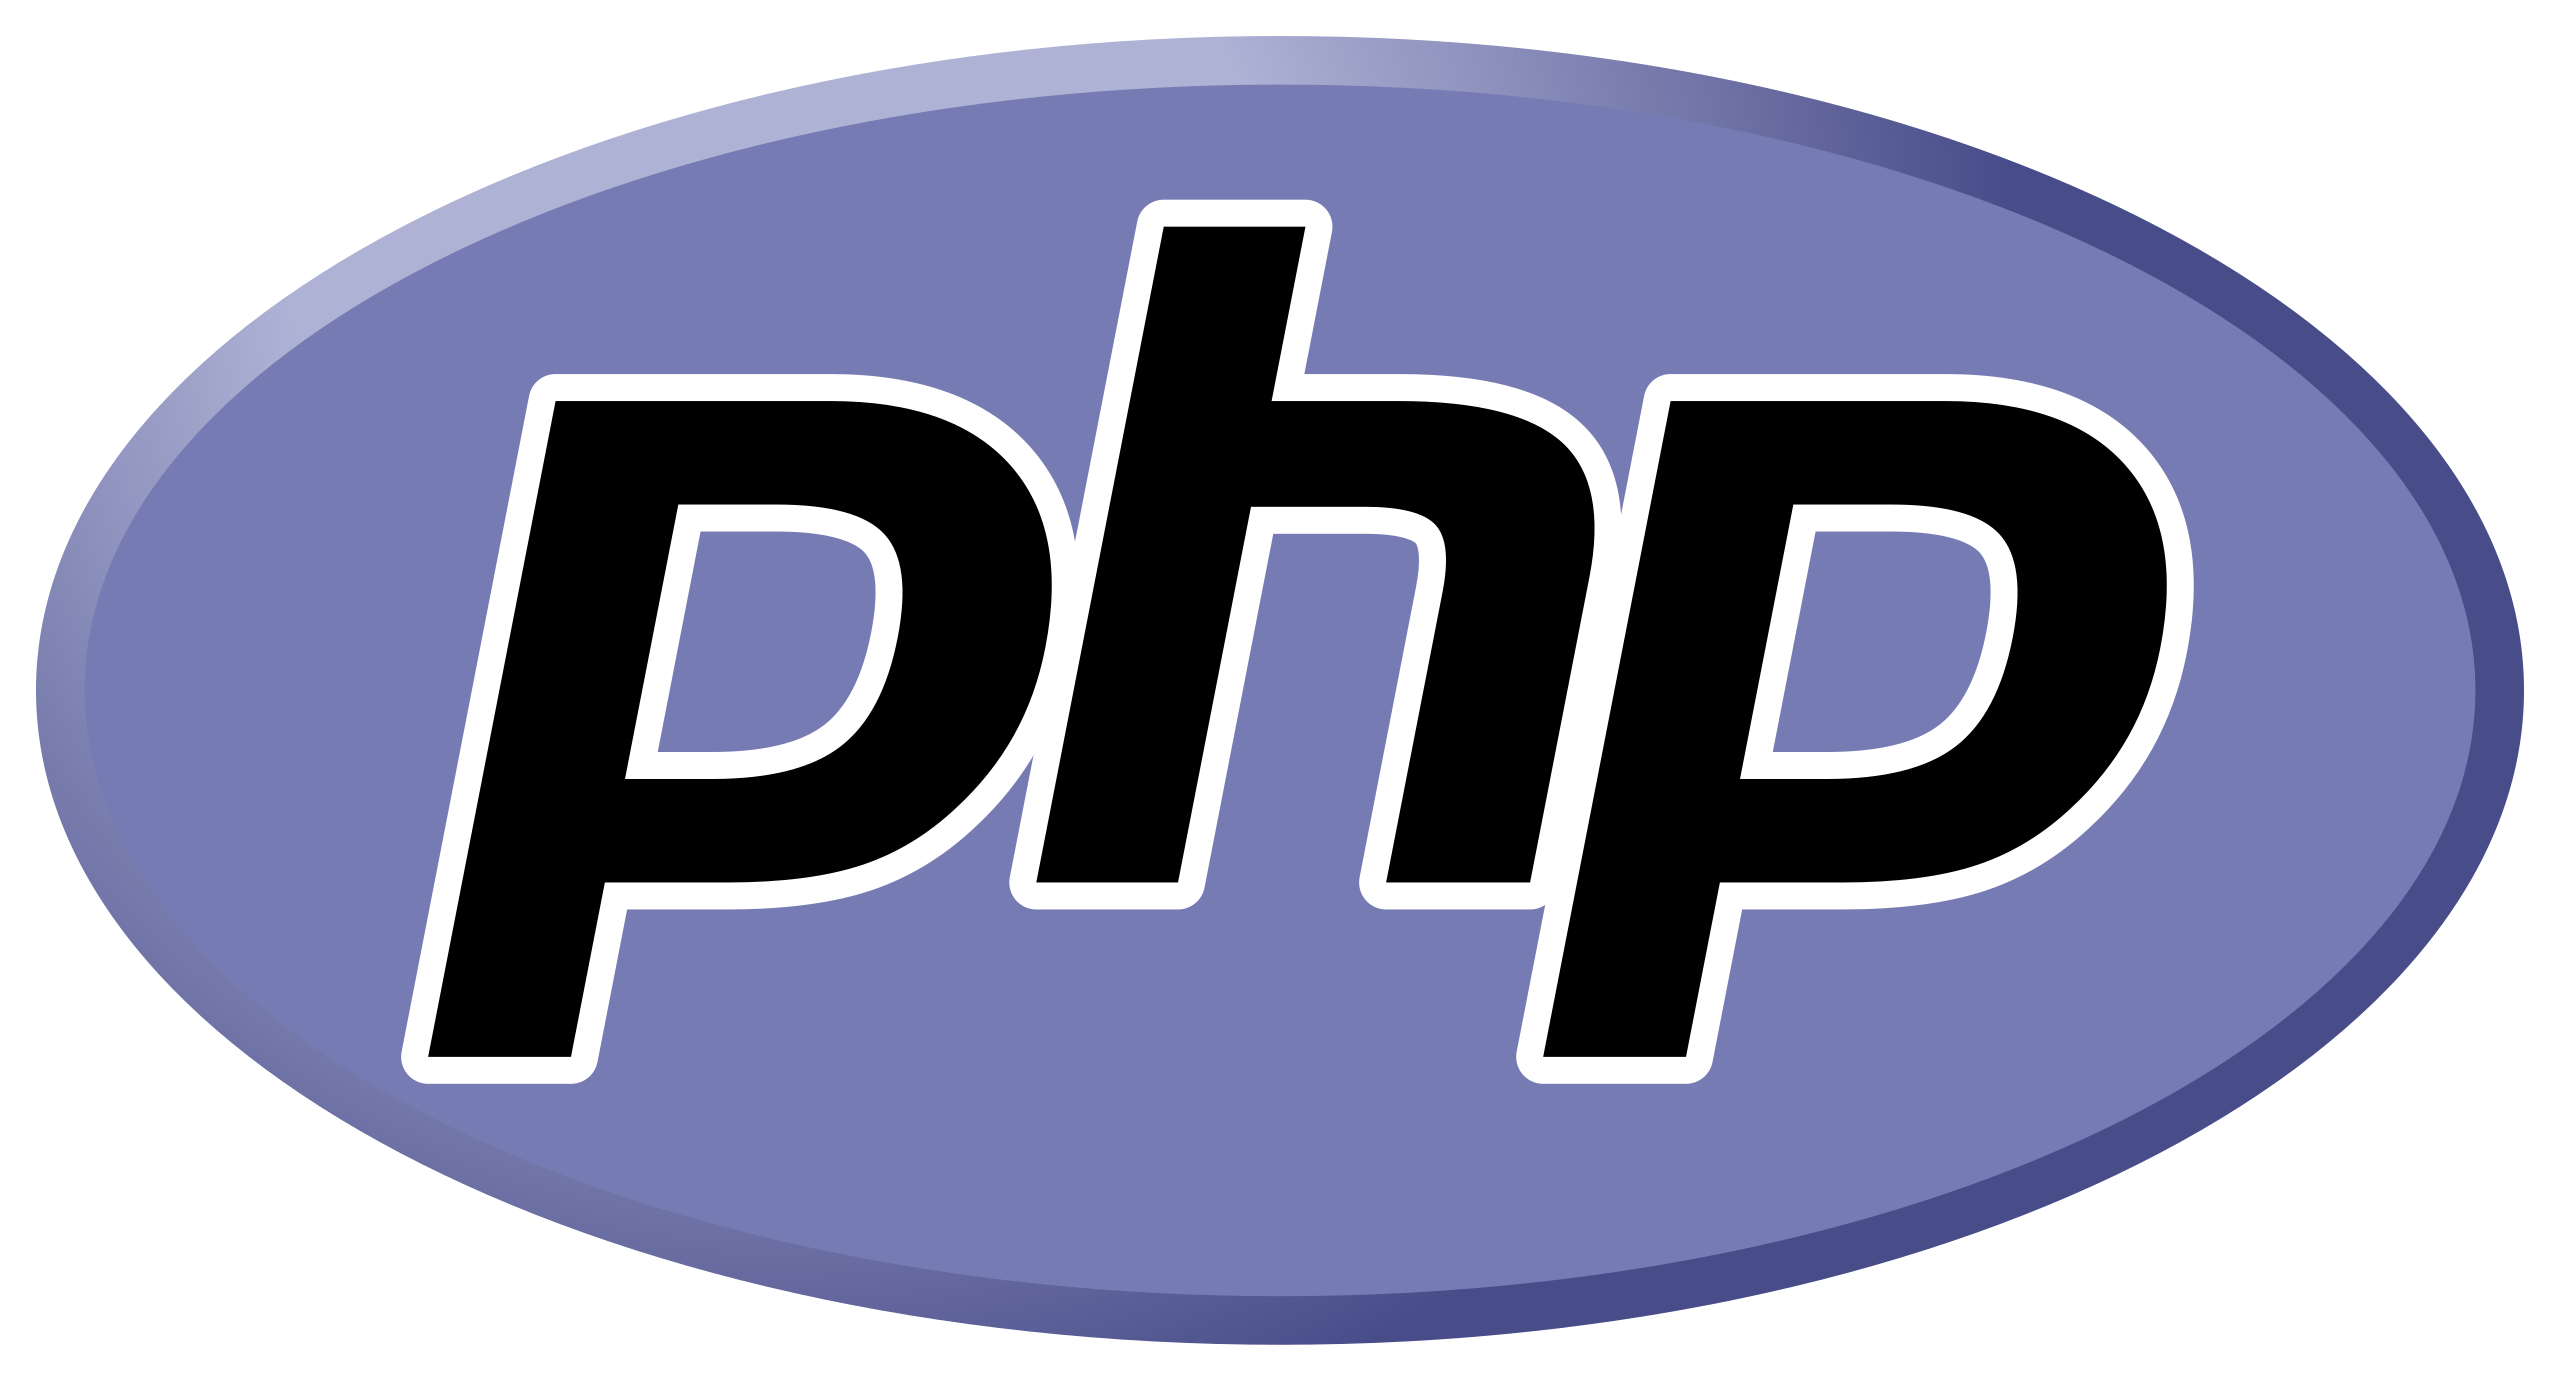 Vitor-Php